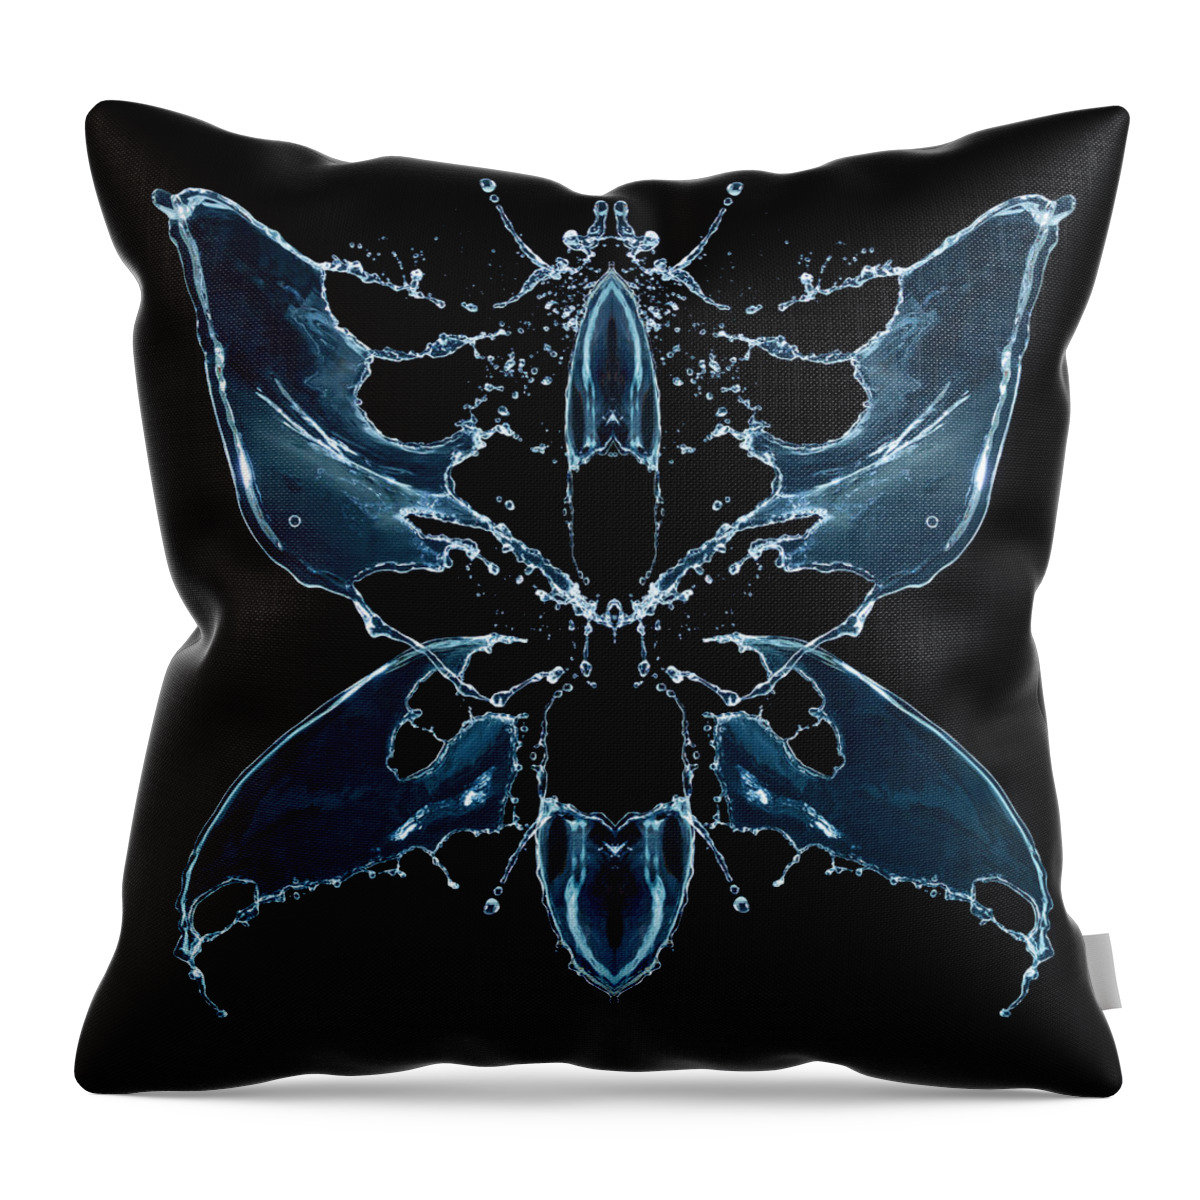 Pareidolia Throw Pillow featuring the photograph Water Splash Butterfly Isolated On Black by Jamesbrey